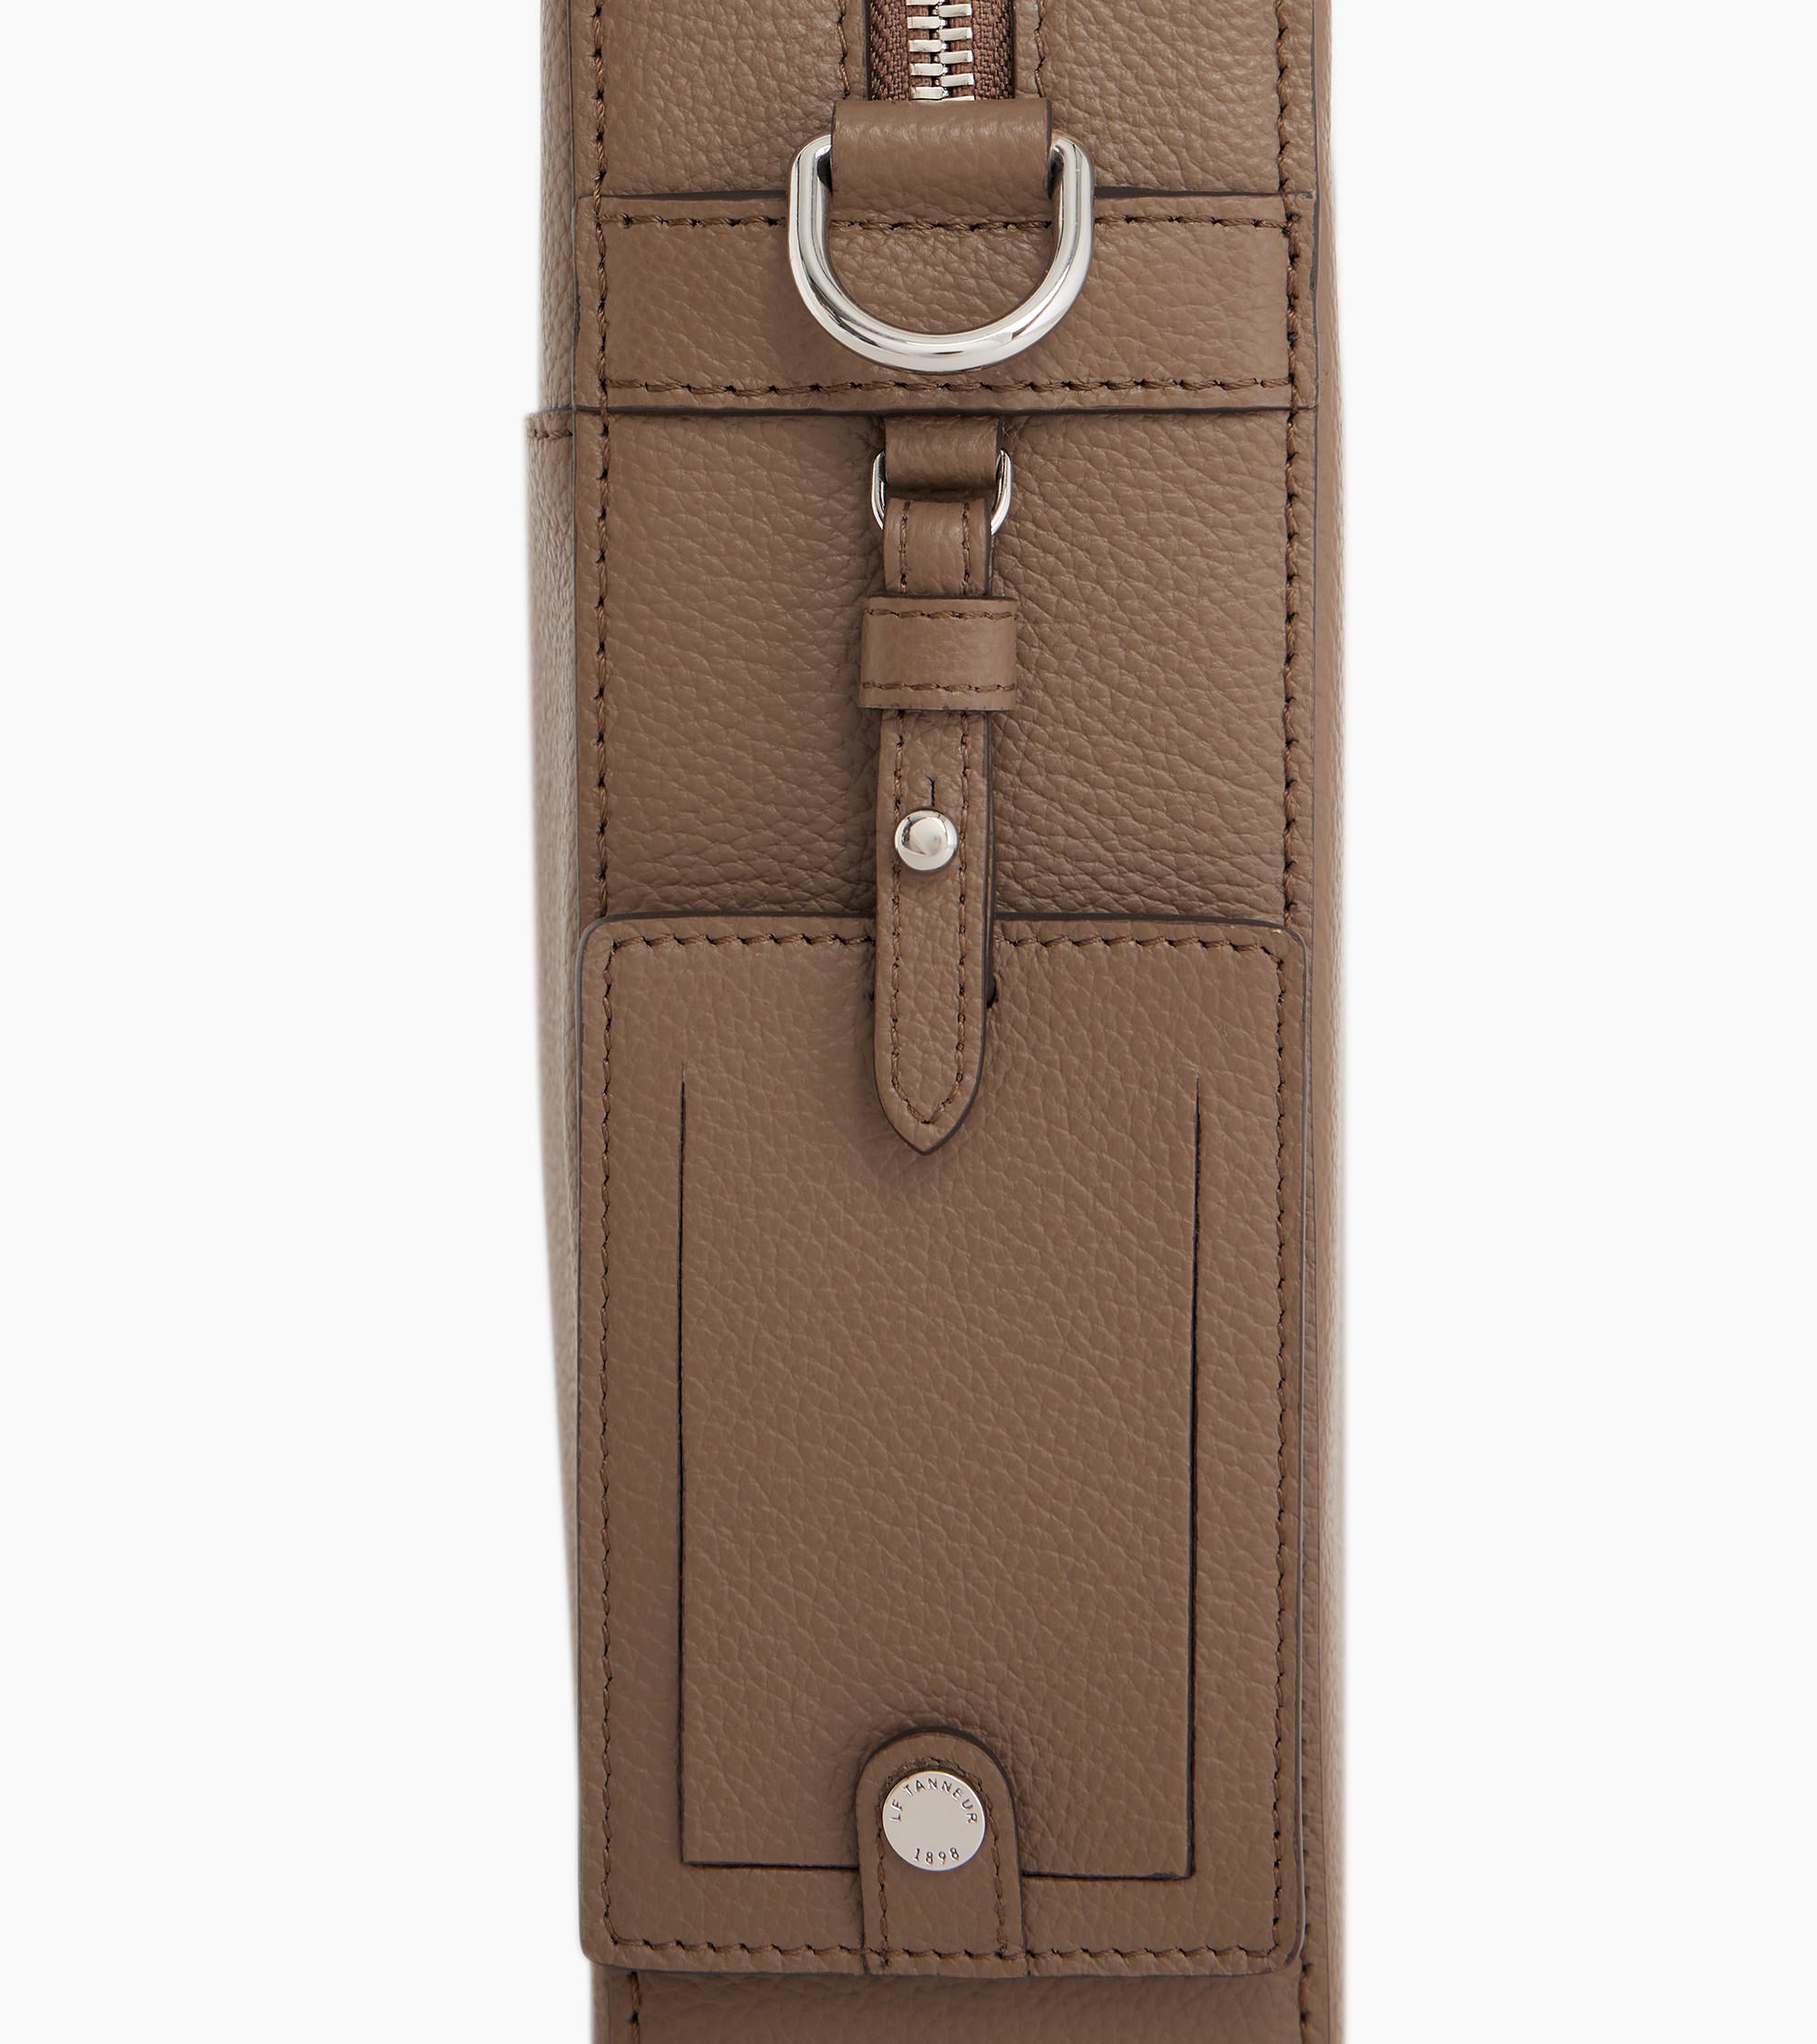 Emile 14" document holder in pebbled leather